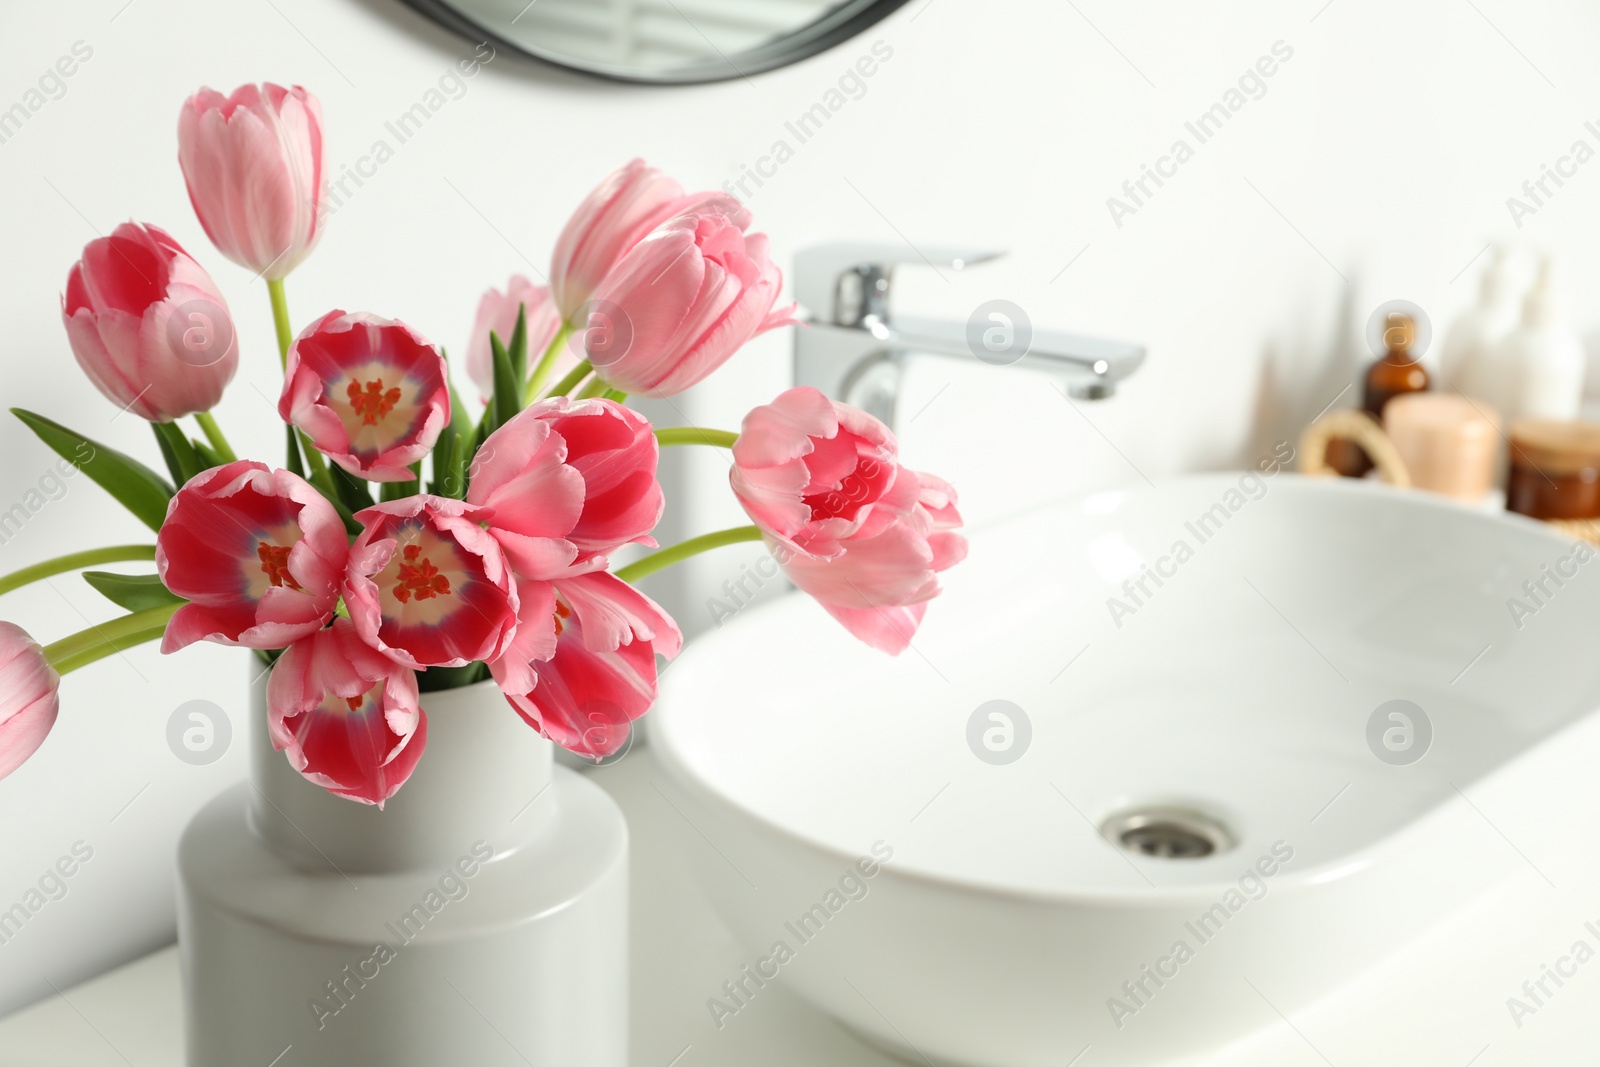 Photo of Vase with beautiful pink tulips and toiletries near sink in bathroom, closeup